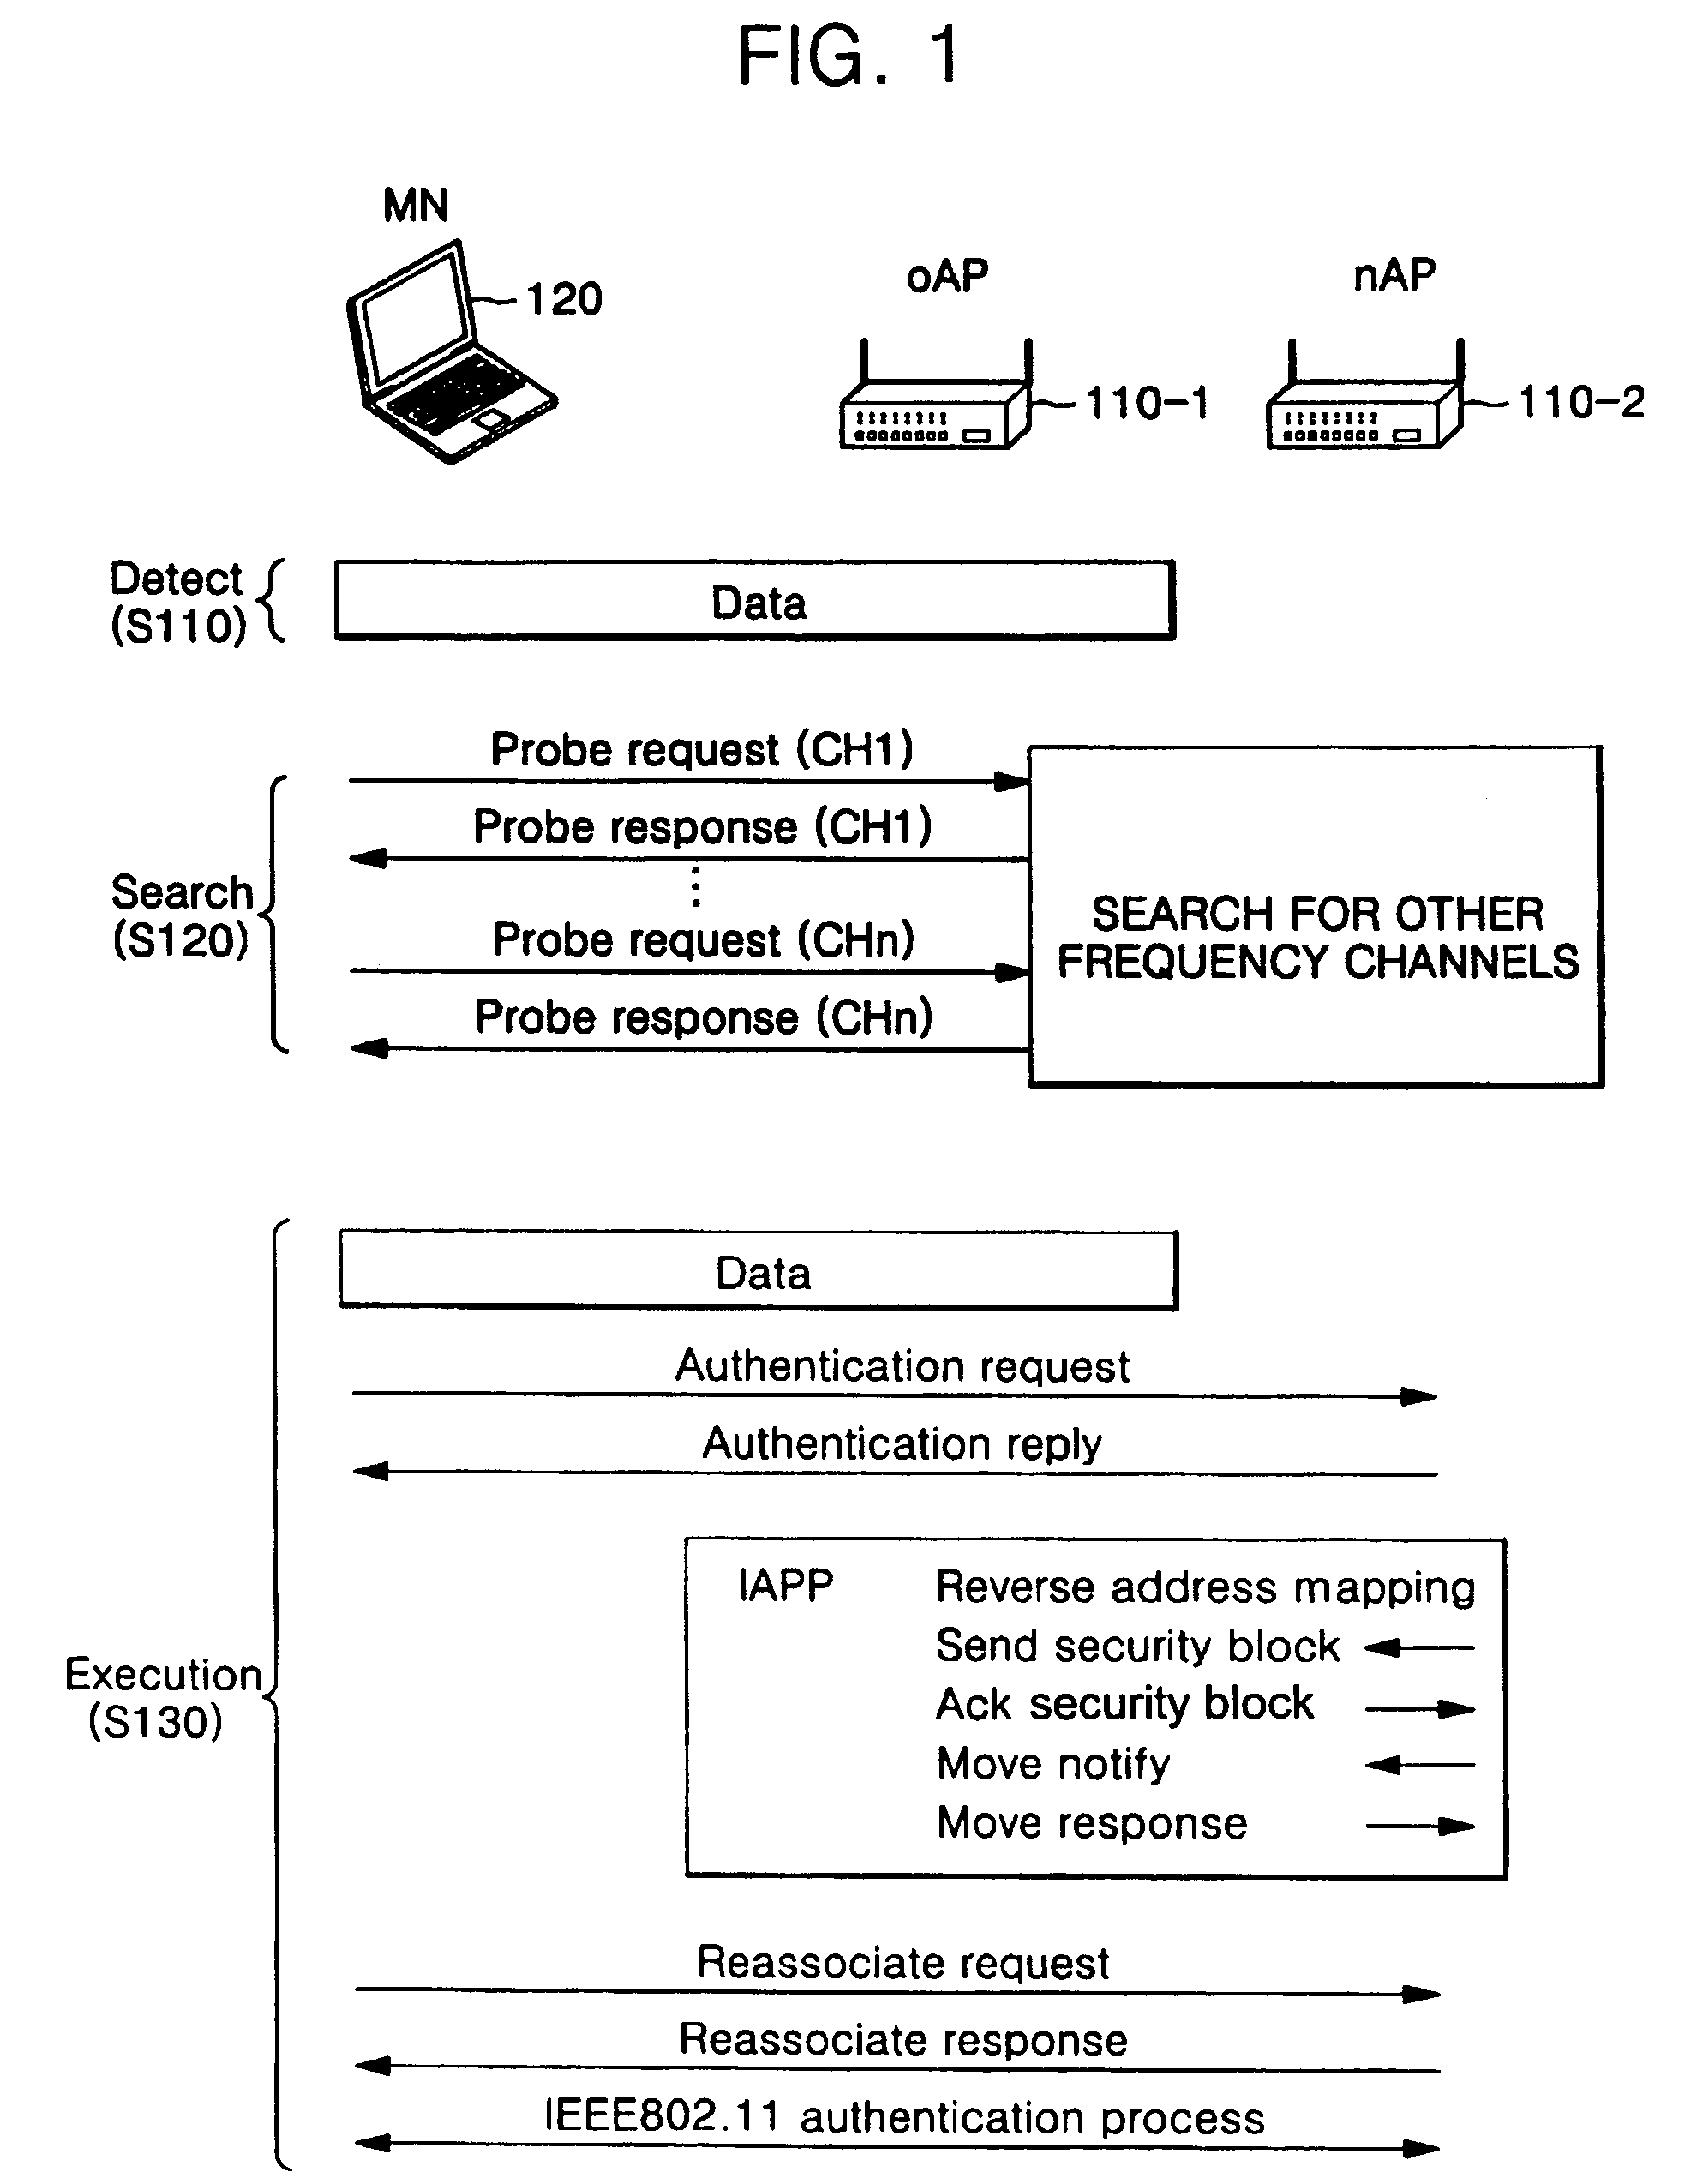 Transferring context during hand-over of mobile node in a wireless network